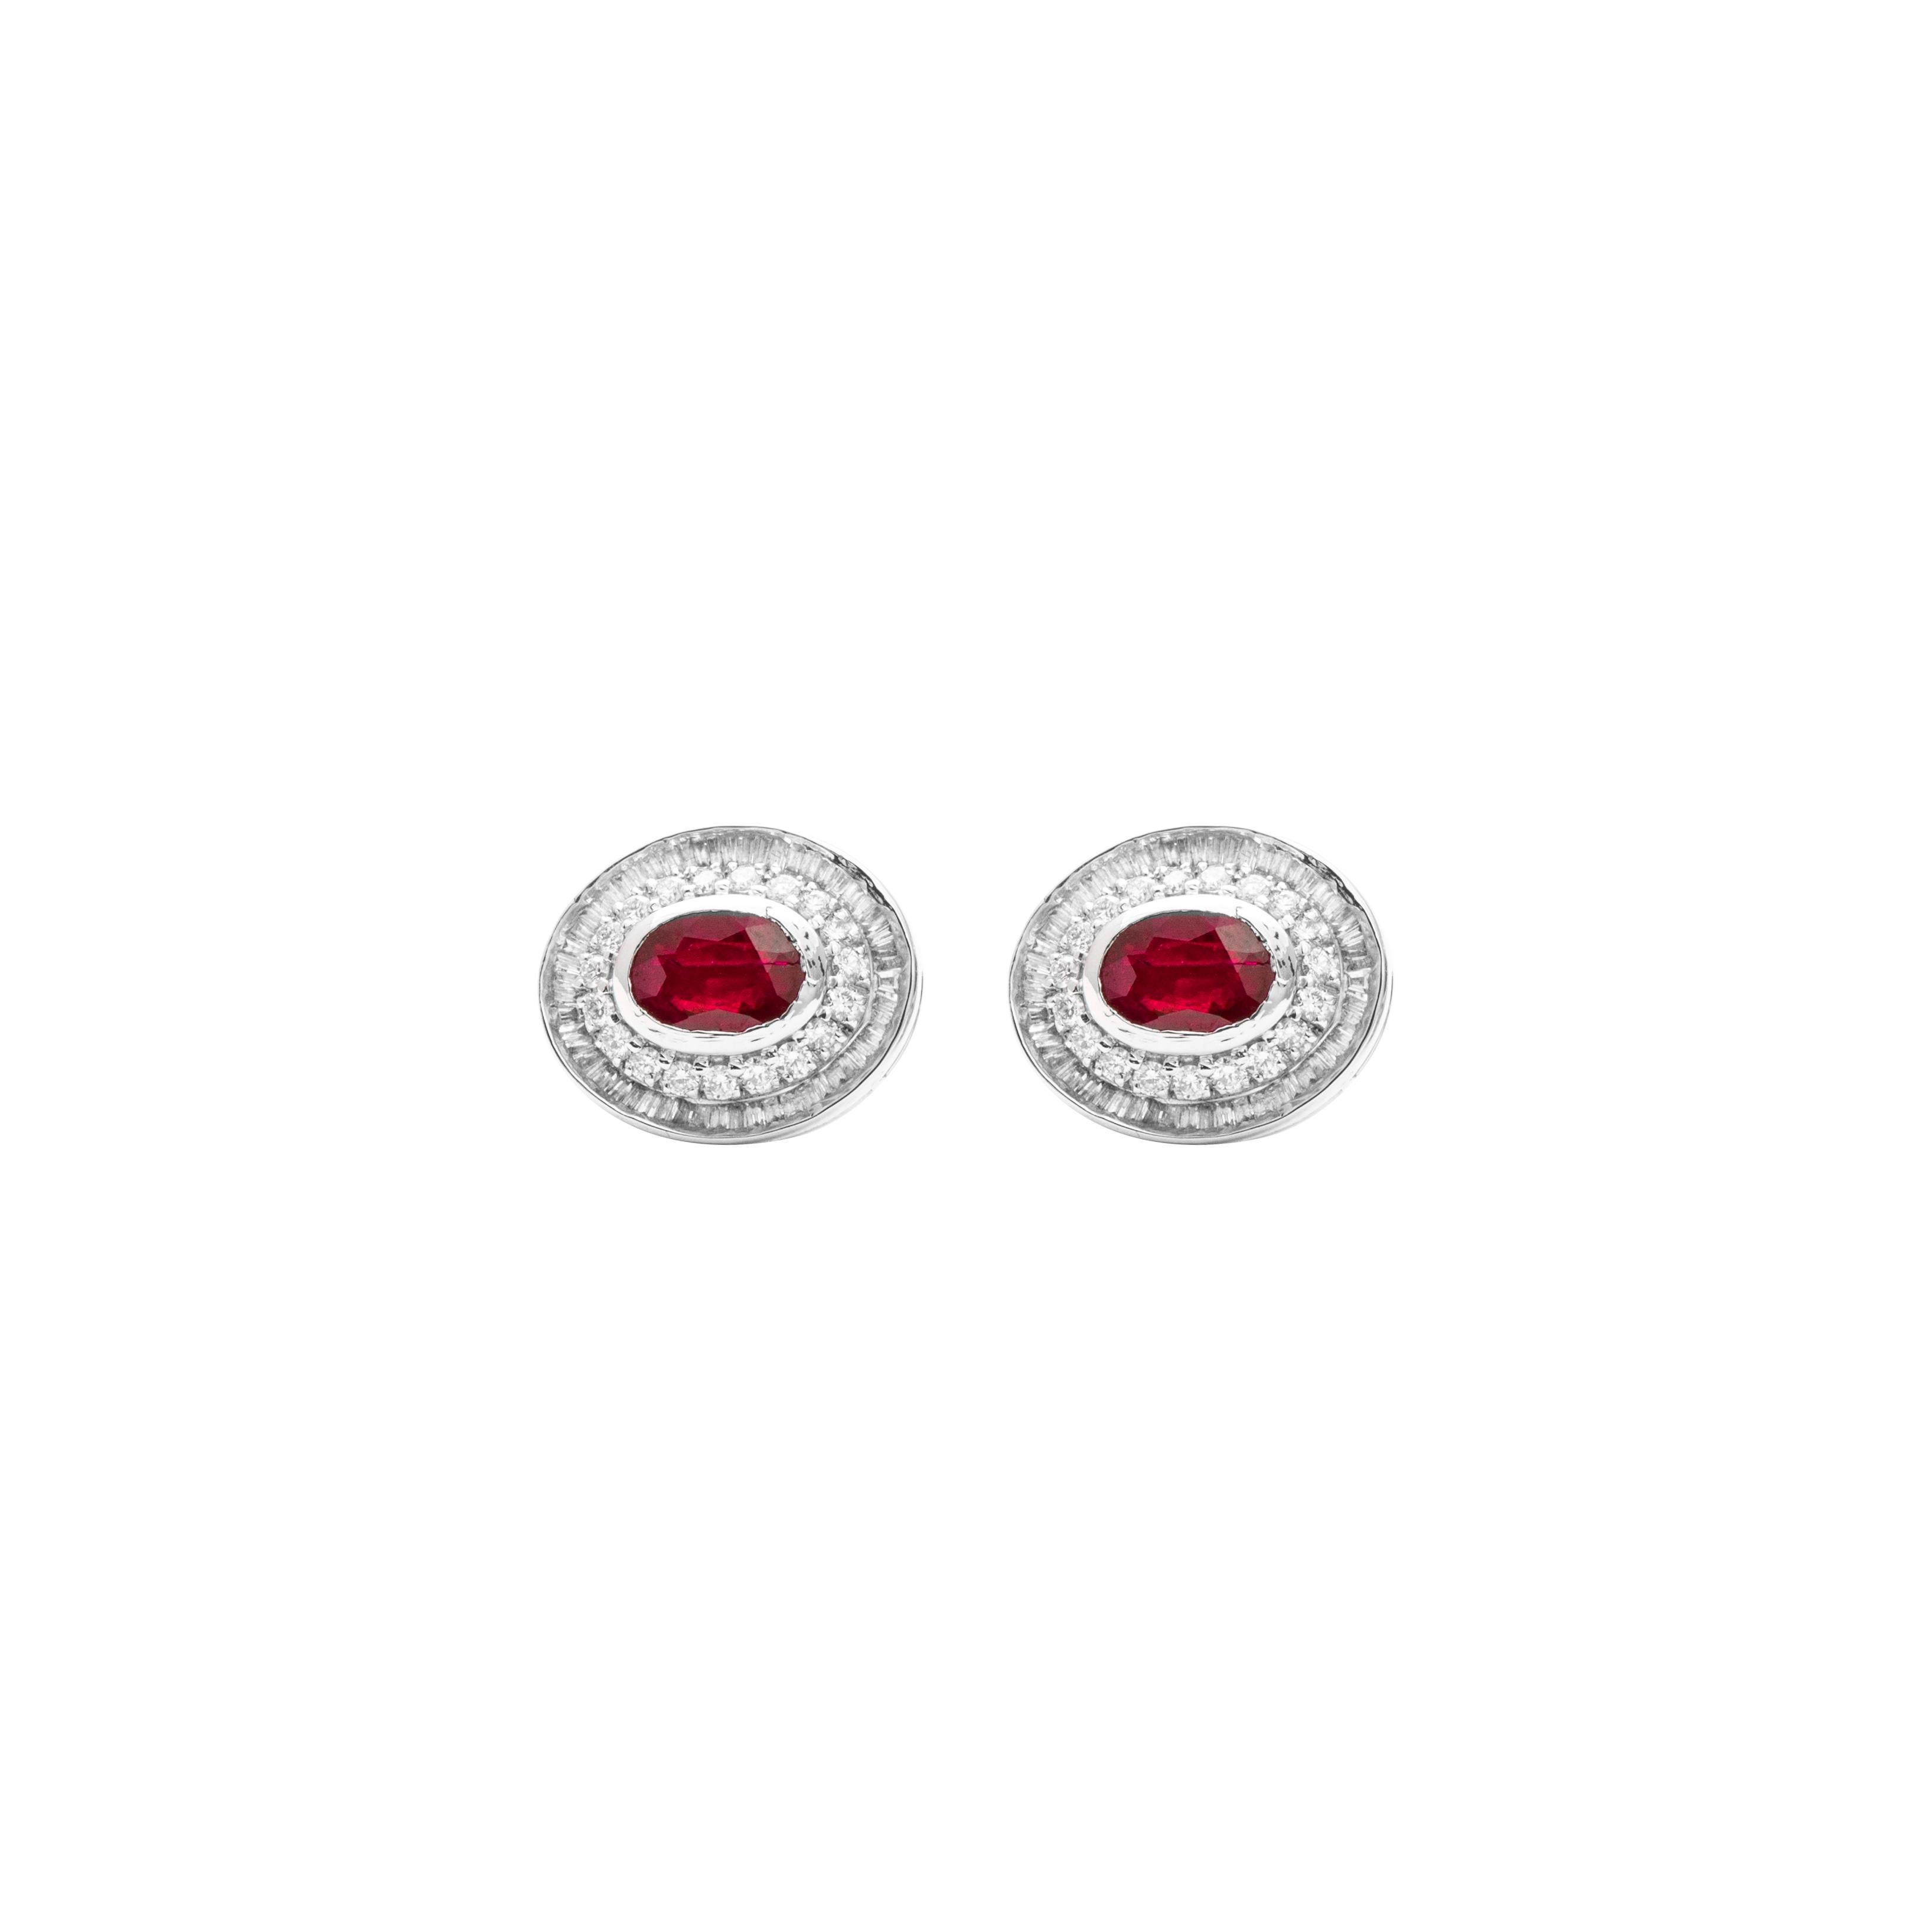 18 Karat White Gold Ruby Diamond Eartops

Classy and elegant eartops set in 18 Karat white gold, studded with beautiful rubies accentuated by baguettes and round brilliant cut diamonds. Ideal for day and night events.

18 Karat Gold -